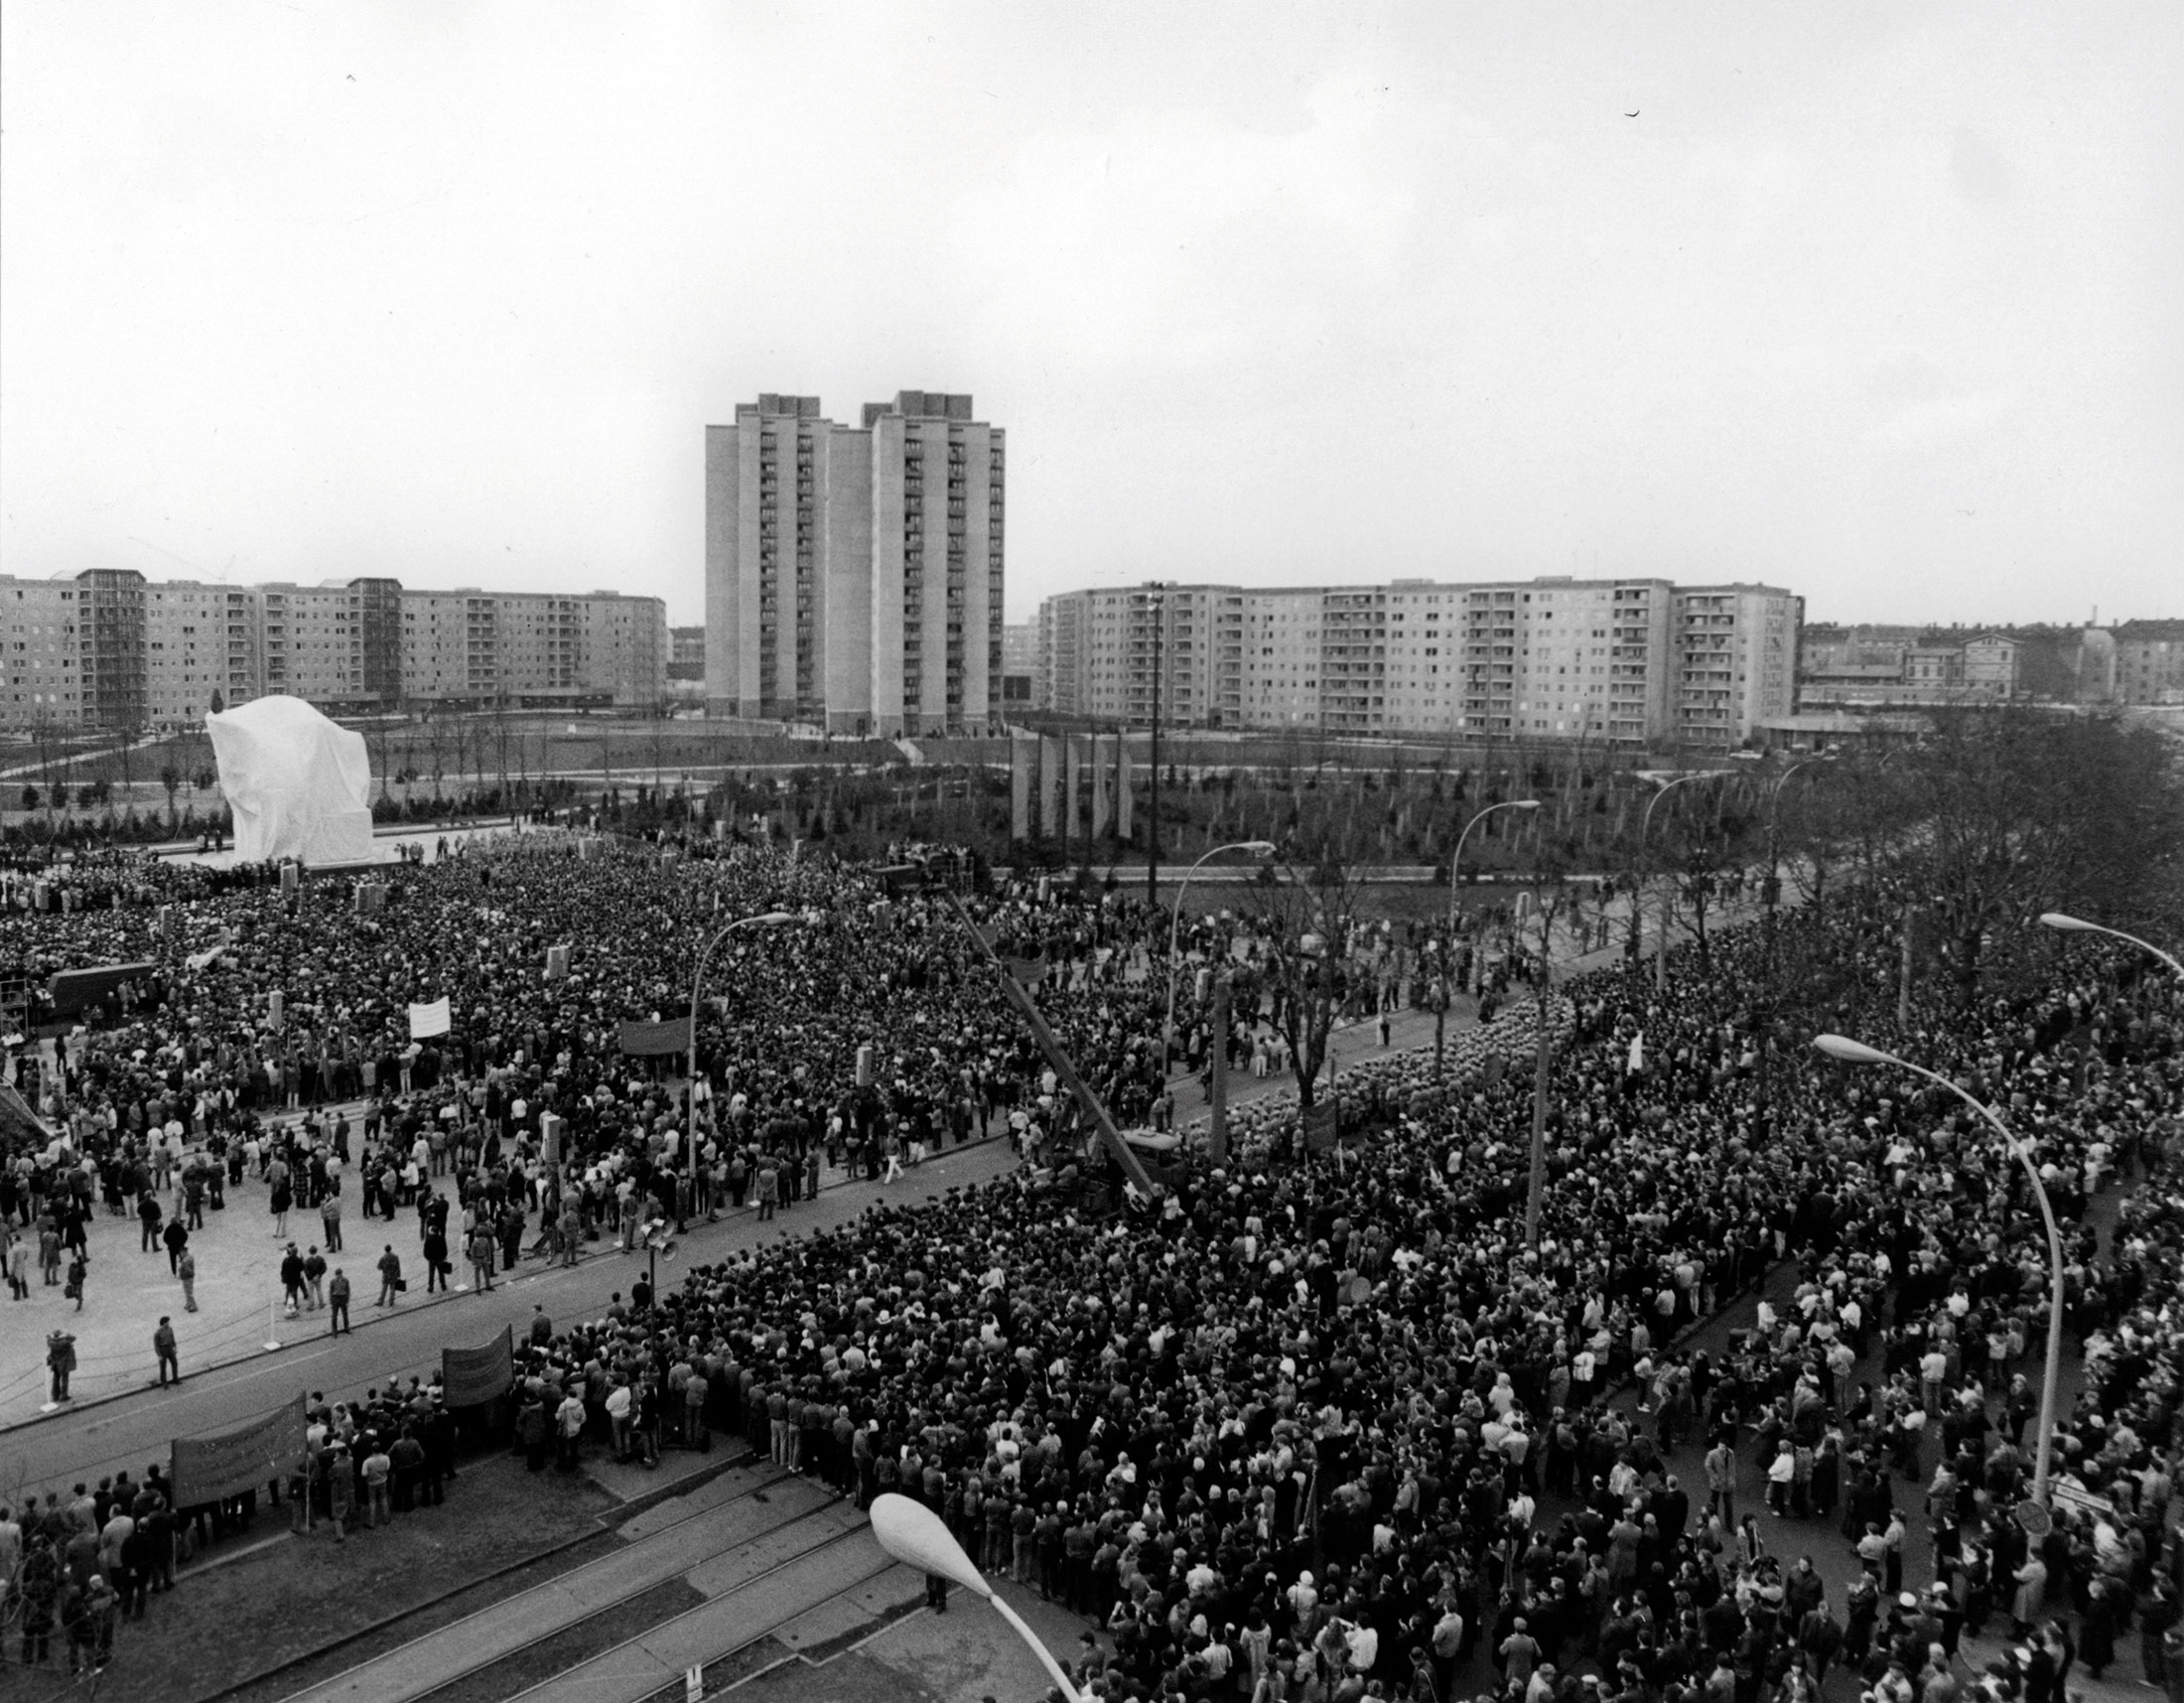 With immense propaganda and the participation of school classes and company workforces, SED General Secretary Erich Honecker inaugurated the memorial and the housing estate on the eve of Ernst Thälmann‘s 100th birthday on 15 April 1986.